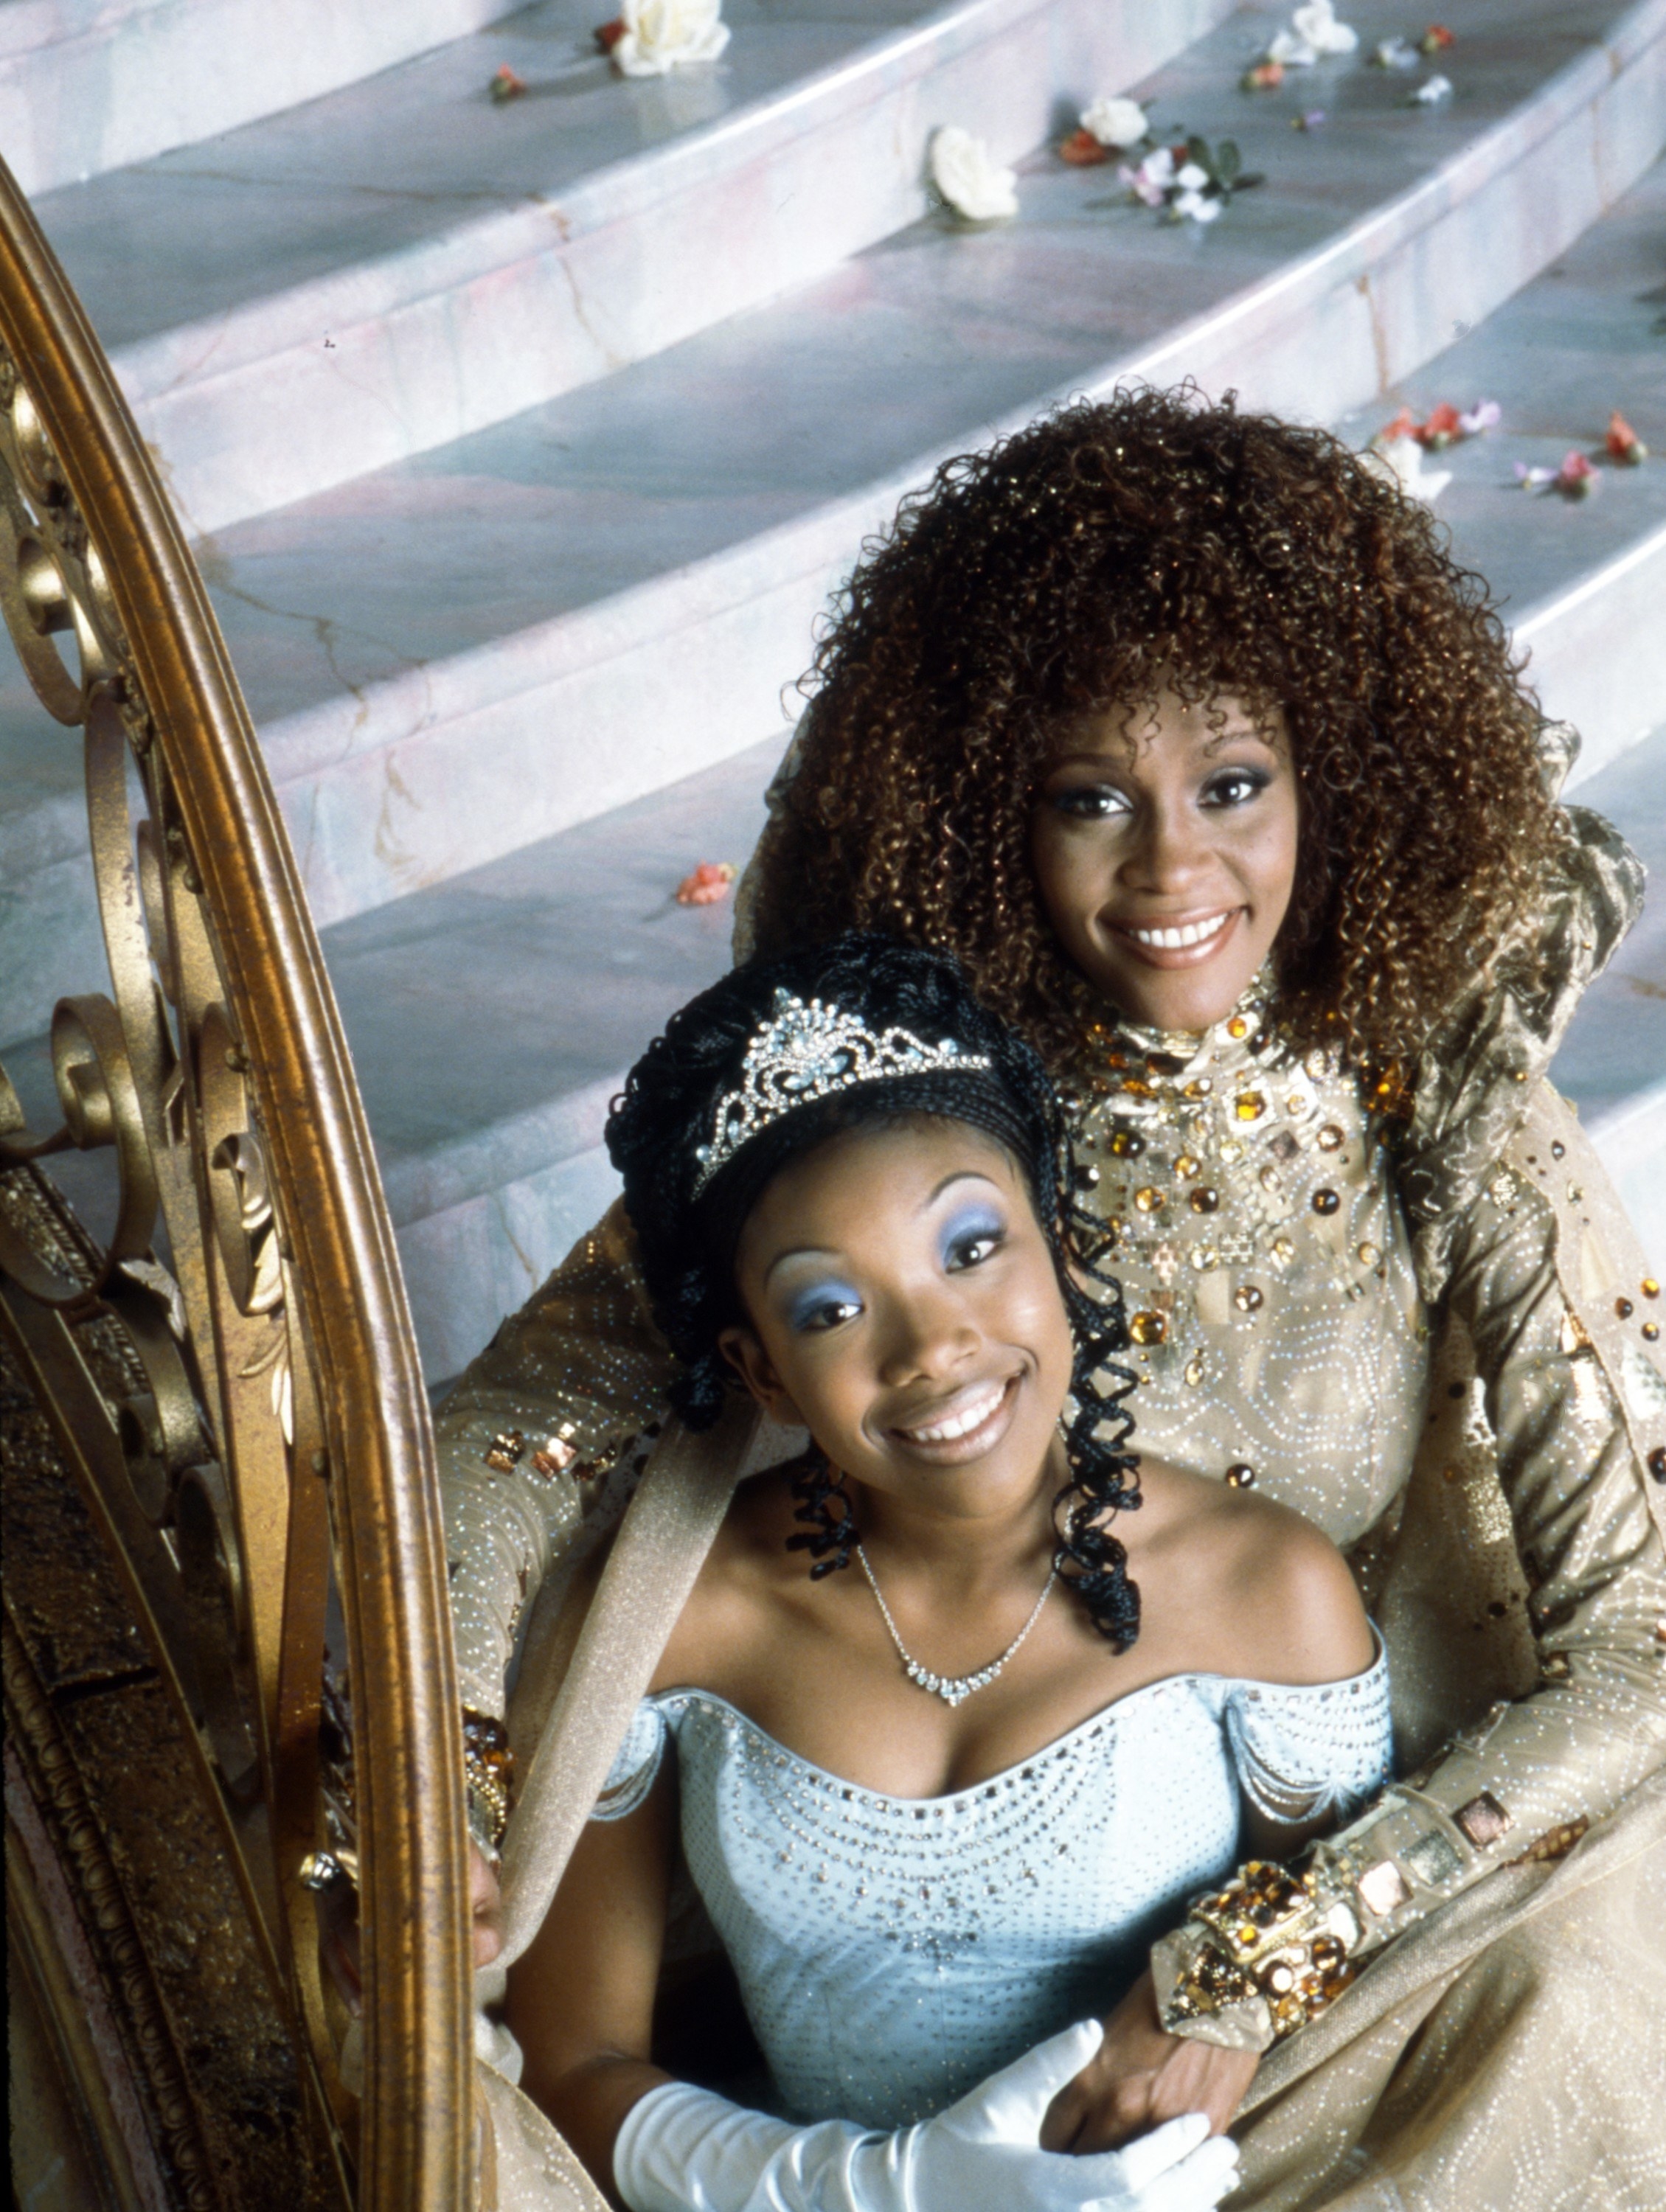 Brandy as Cinderella and Whitney Houston as her fairy godmother